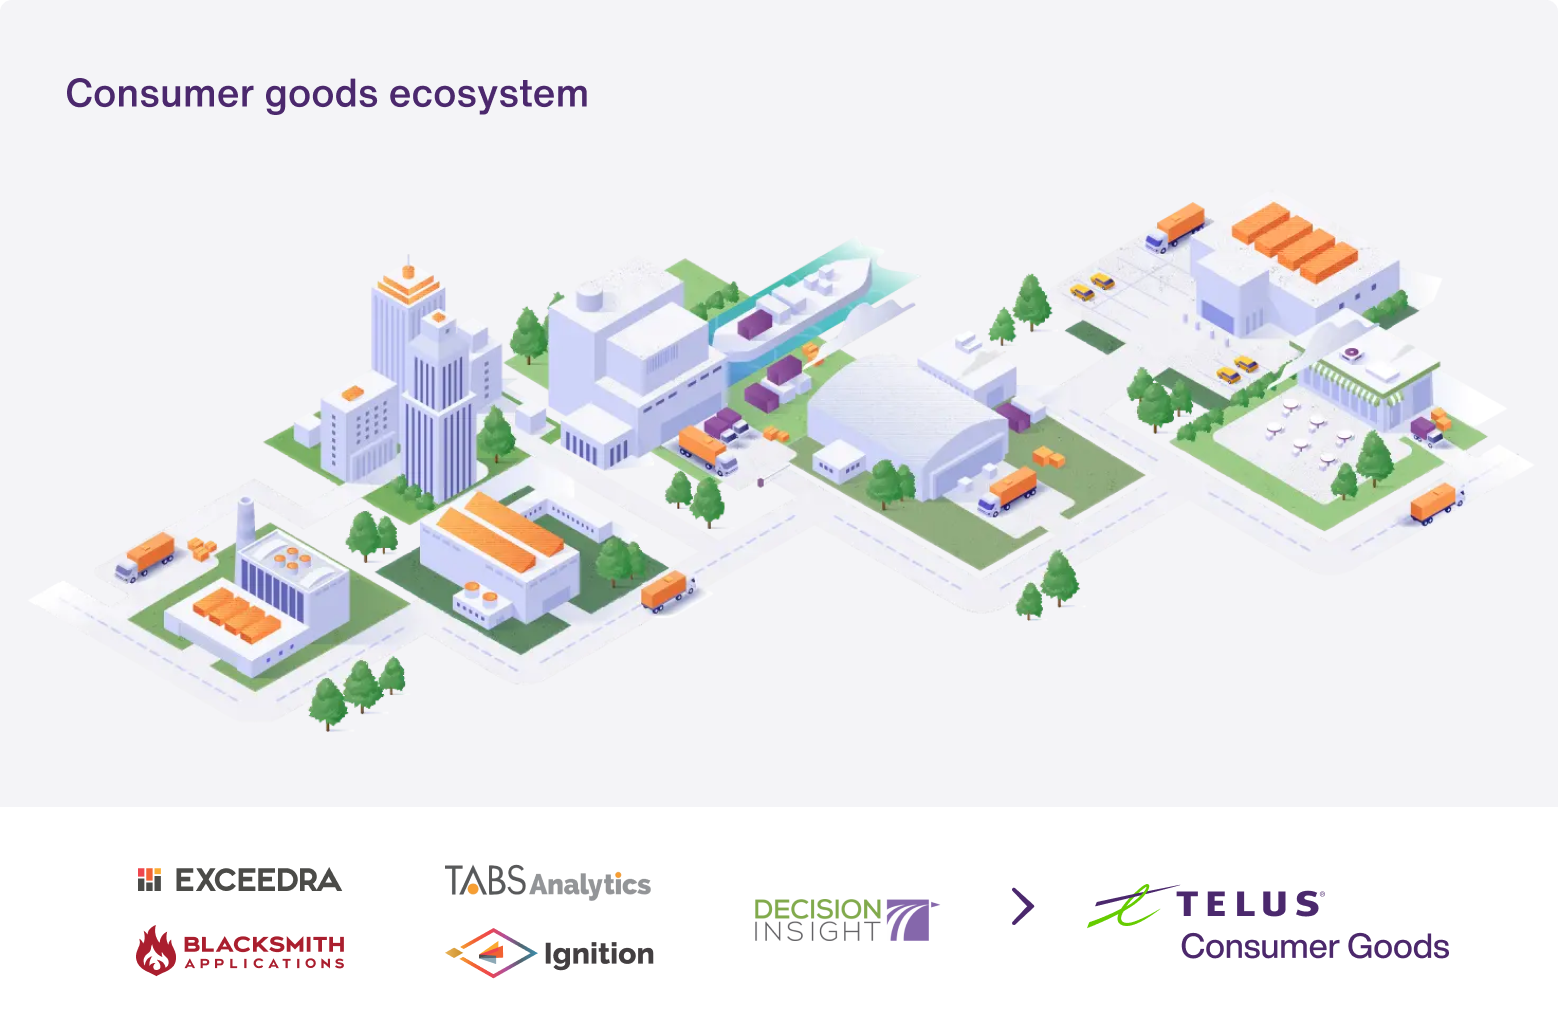 A 3D visualisation of the agribusiness ecosystem